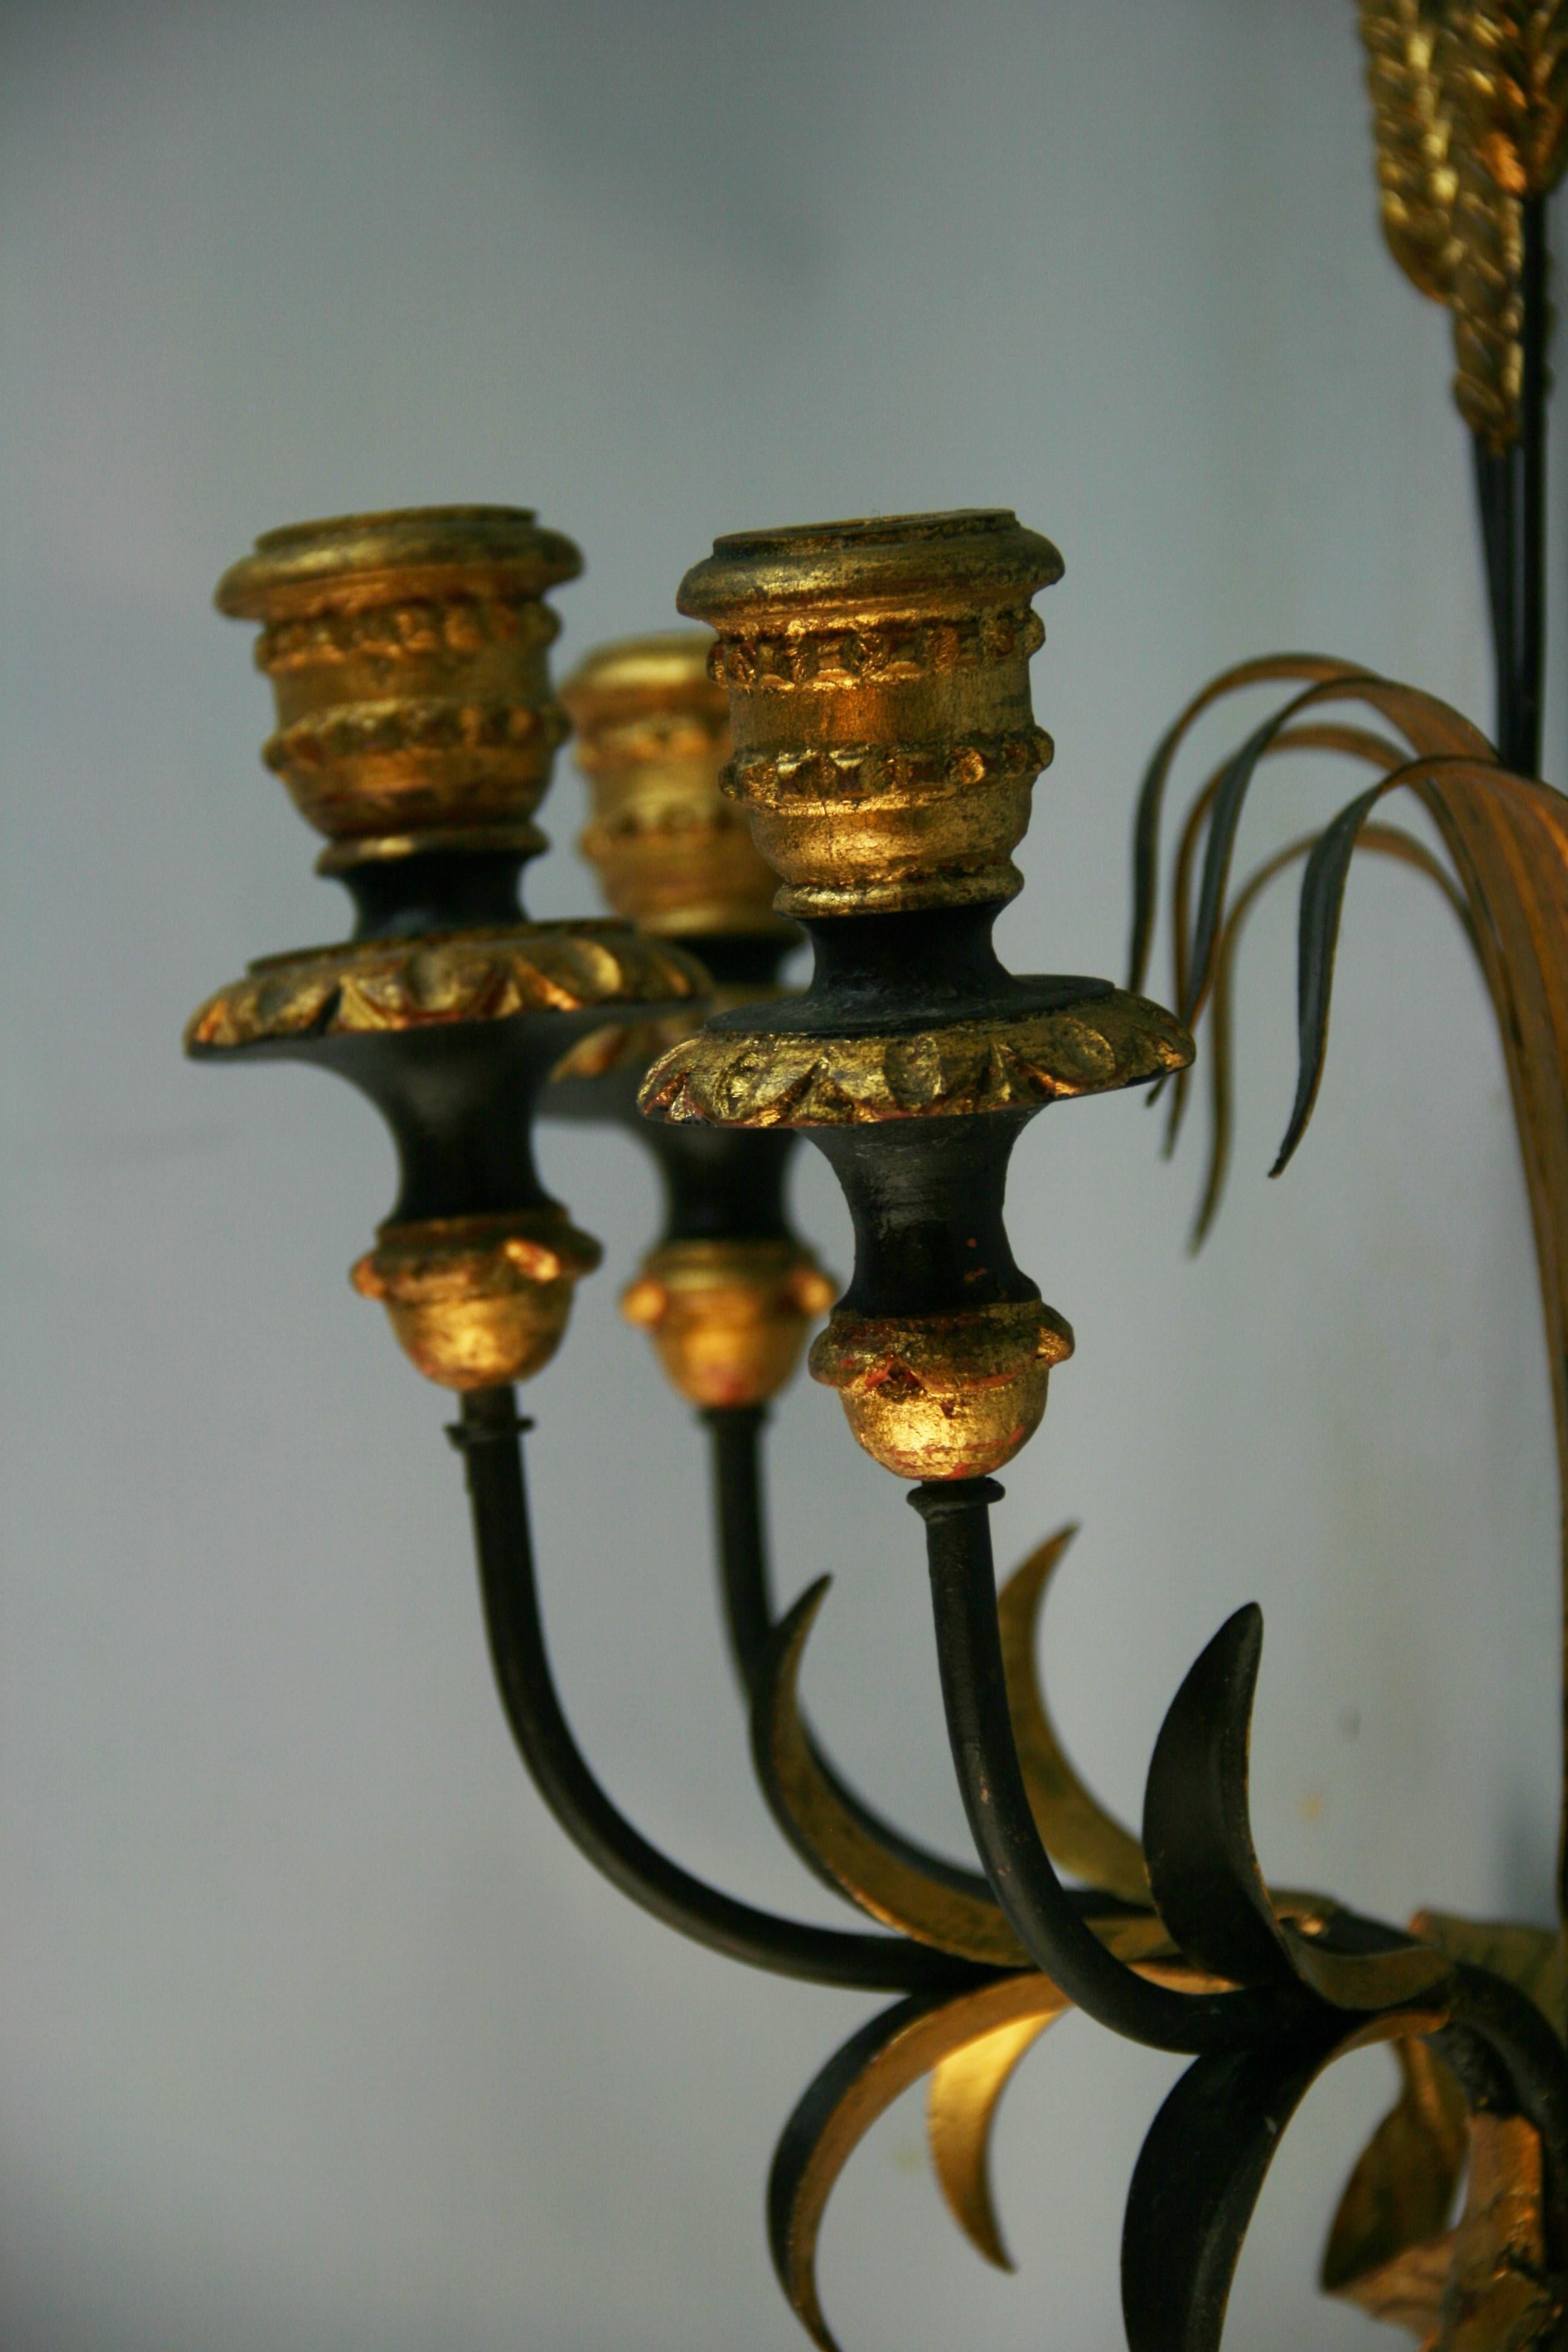 Single Italian Leaf and Wheat Gilt Wood Candle Sconce For Sale 2